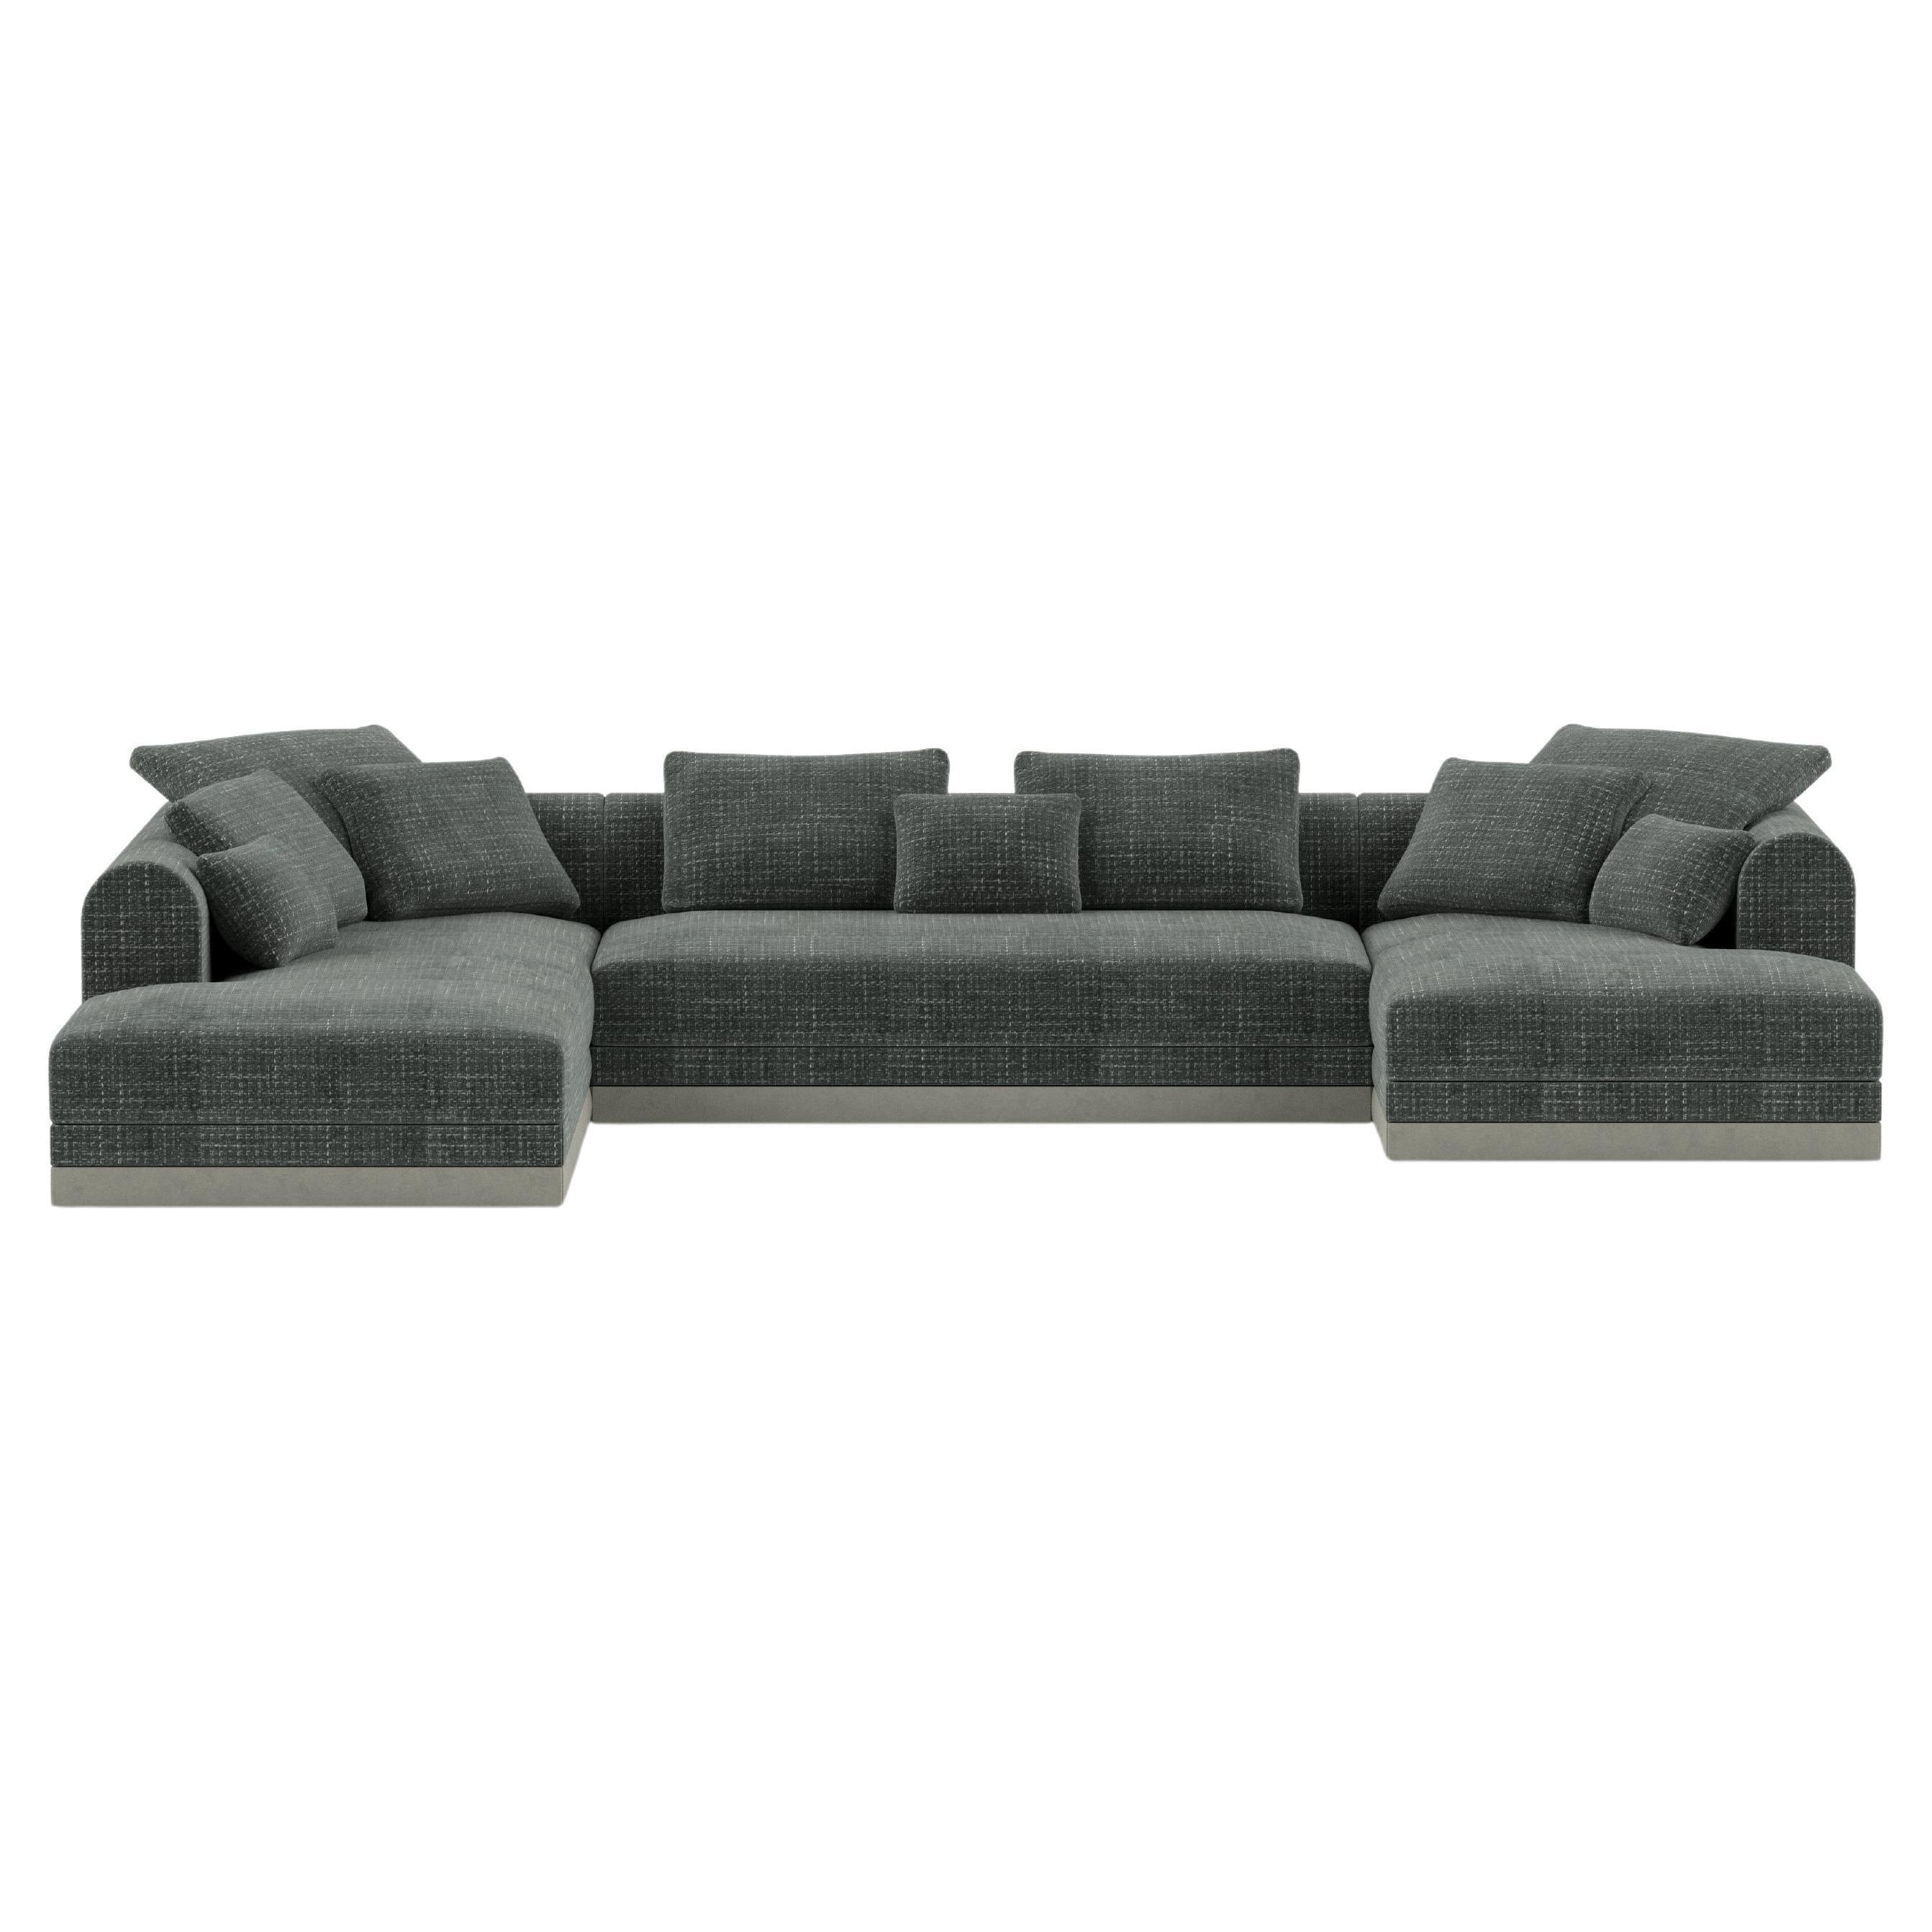 'Aqueduct' Contemporary Sofa by Poiat, Setup 4, Yang 95, Low Plinth For Sale